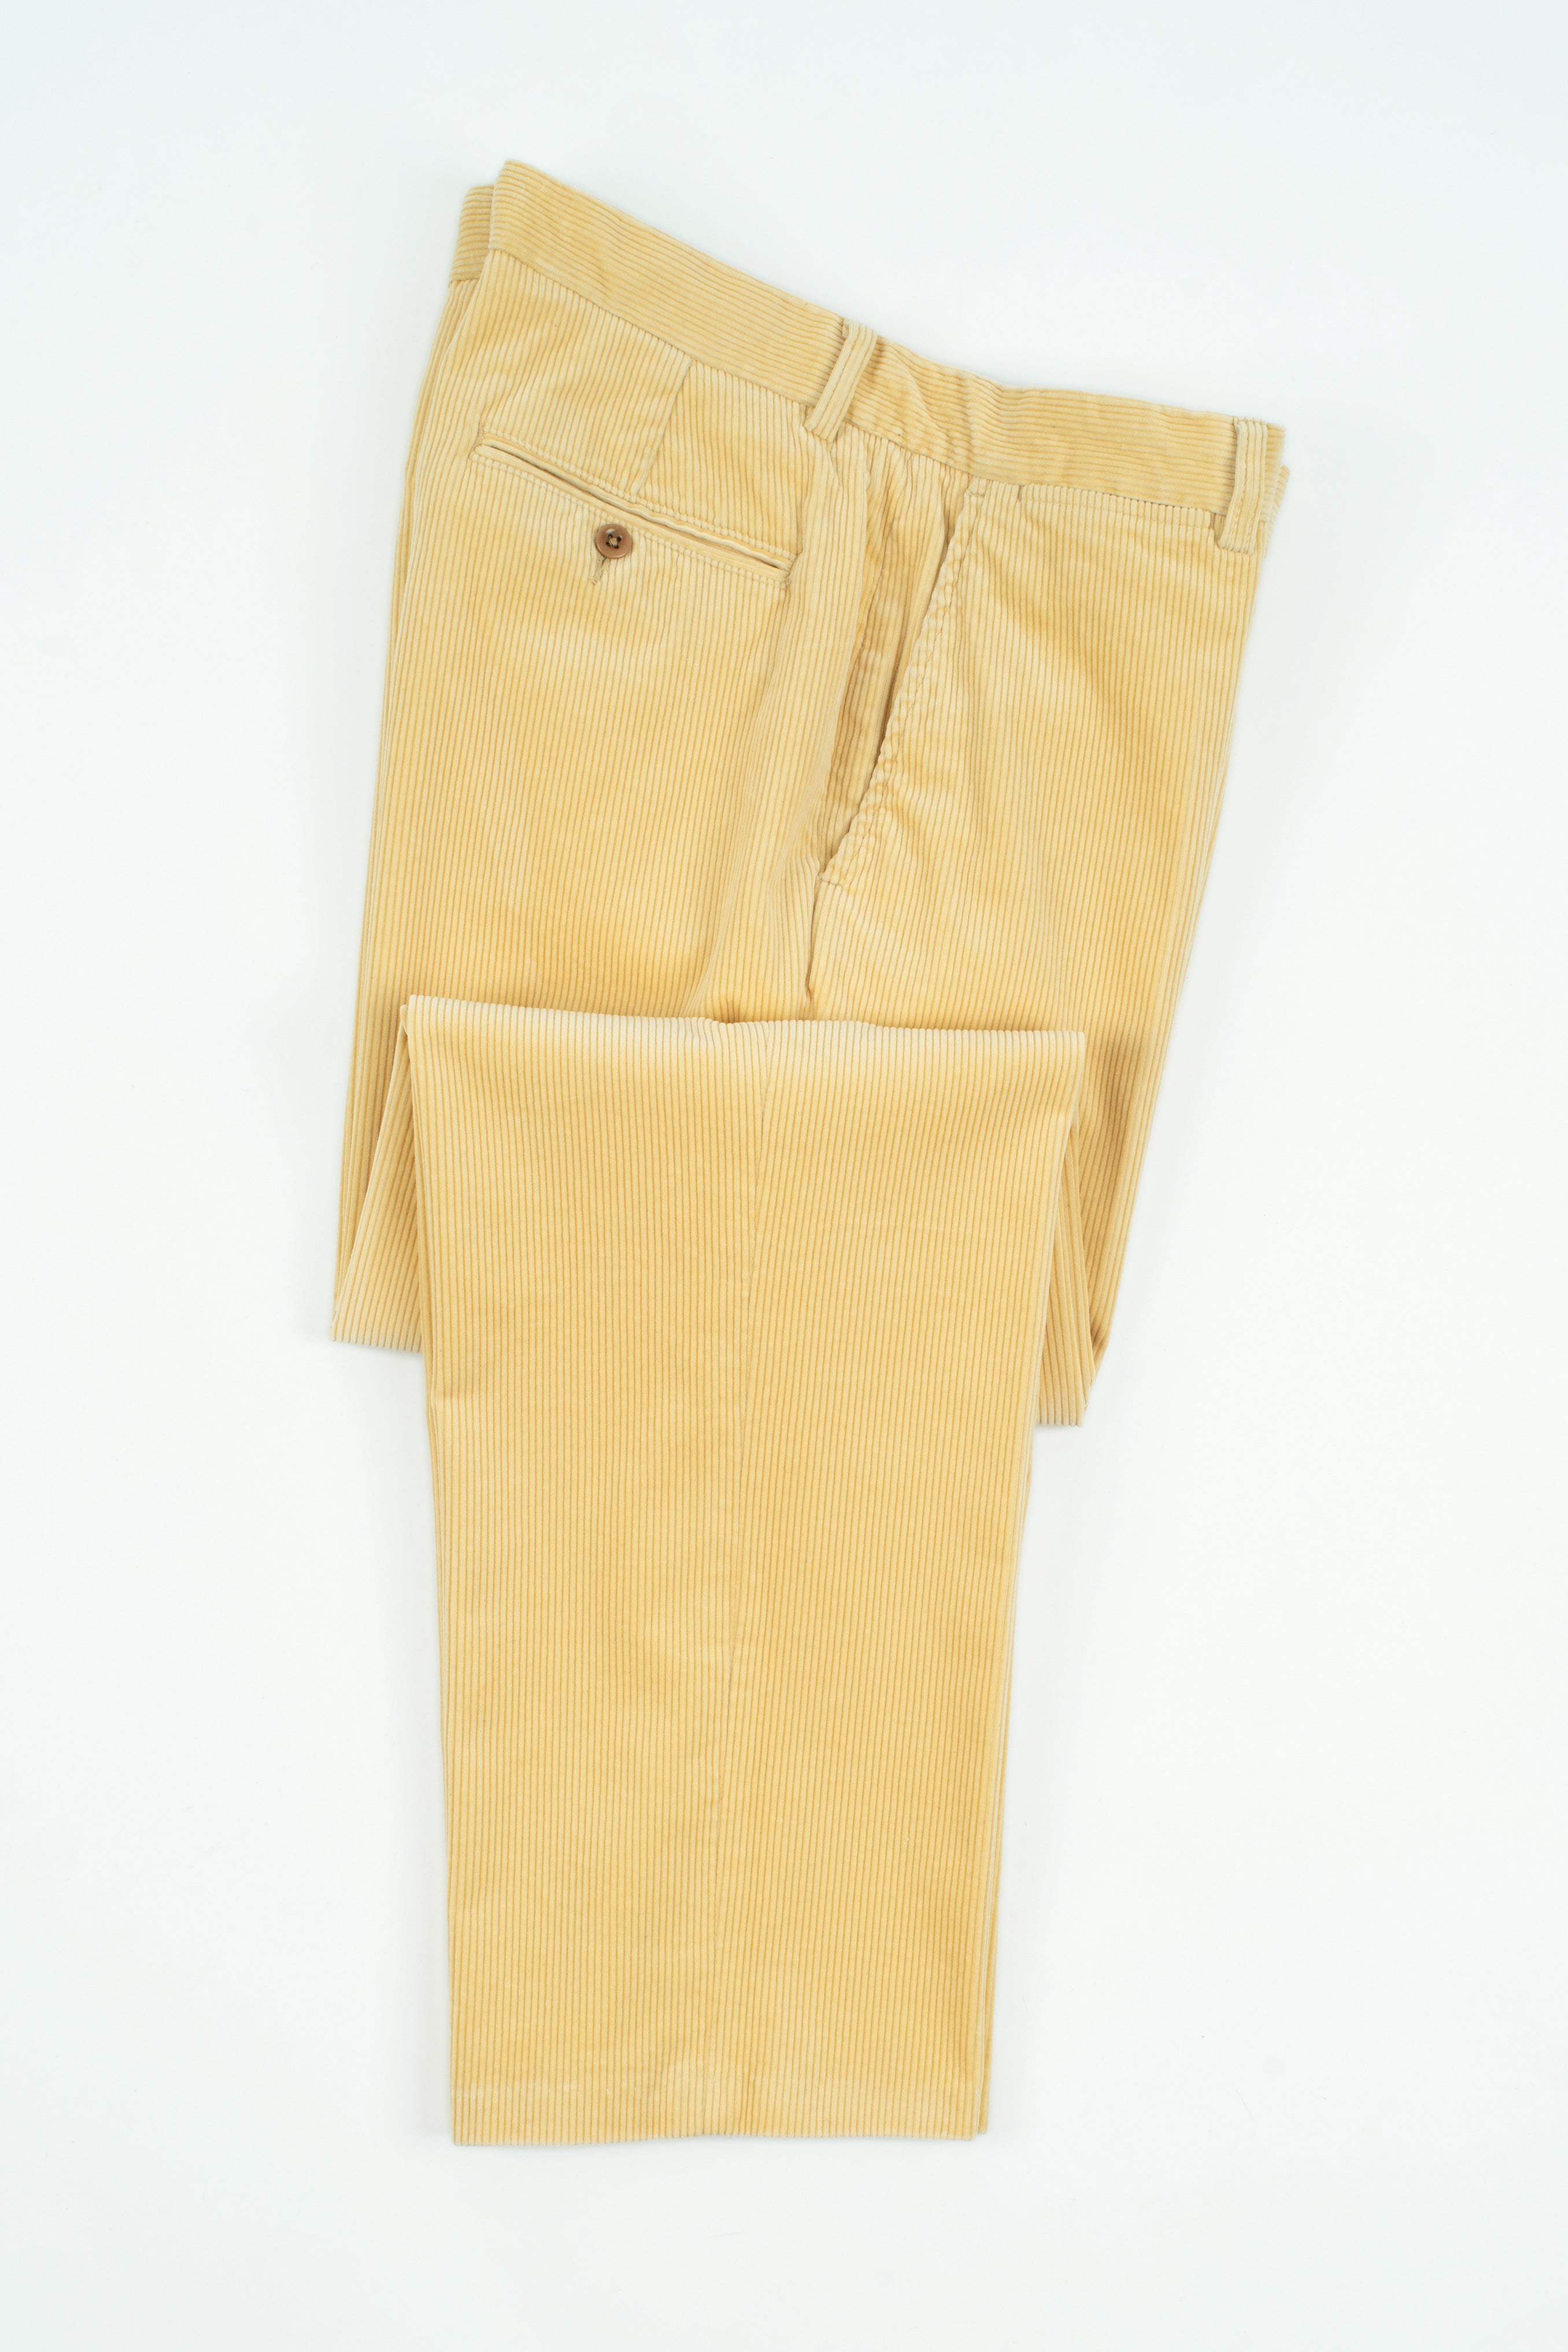 Mustard pants (outfit combinations for men)